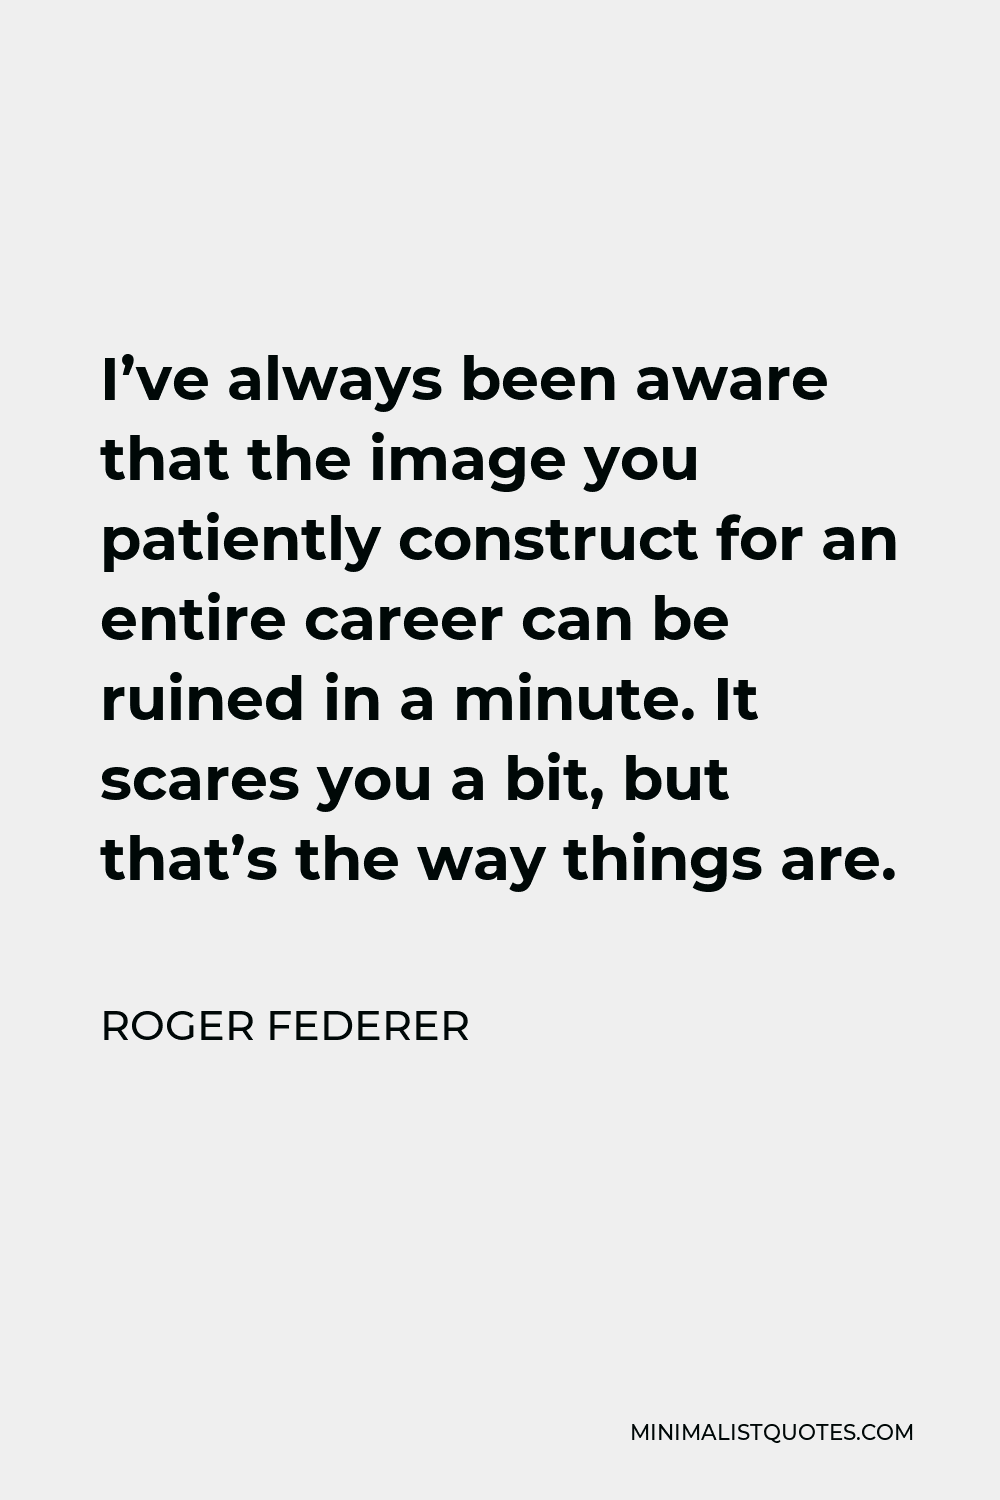 Roger Federer Quote - I’ve always been aware that the image you patiently construct for an entire career can be ruined in a minute. It scares you a bit, but that’s the way things are.